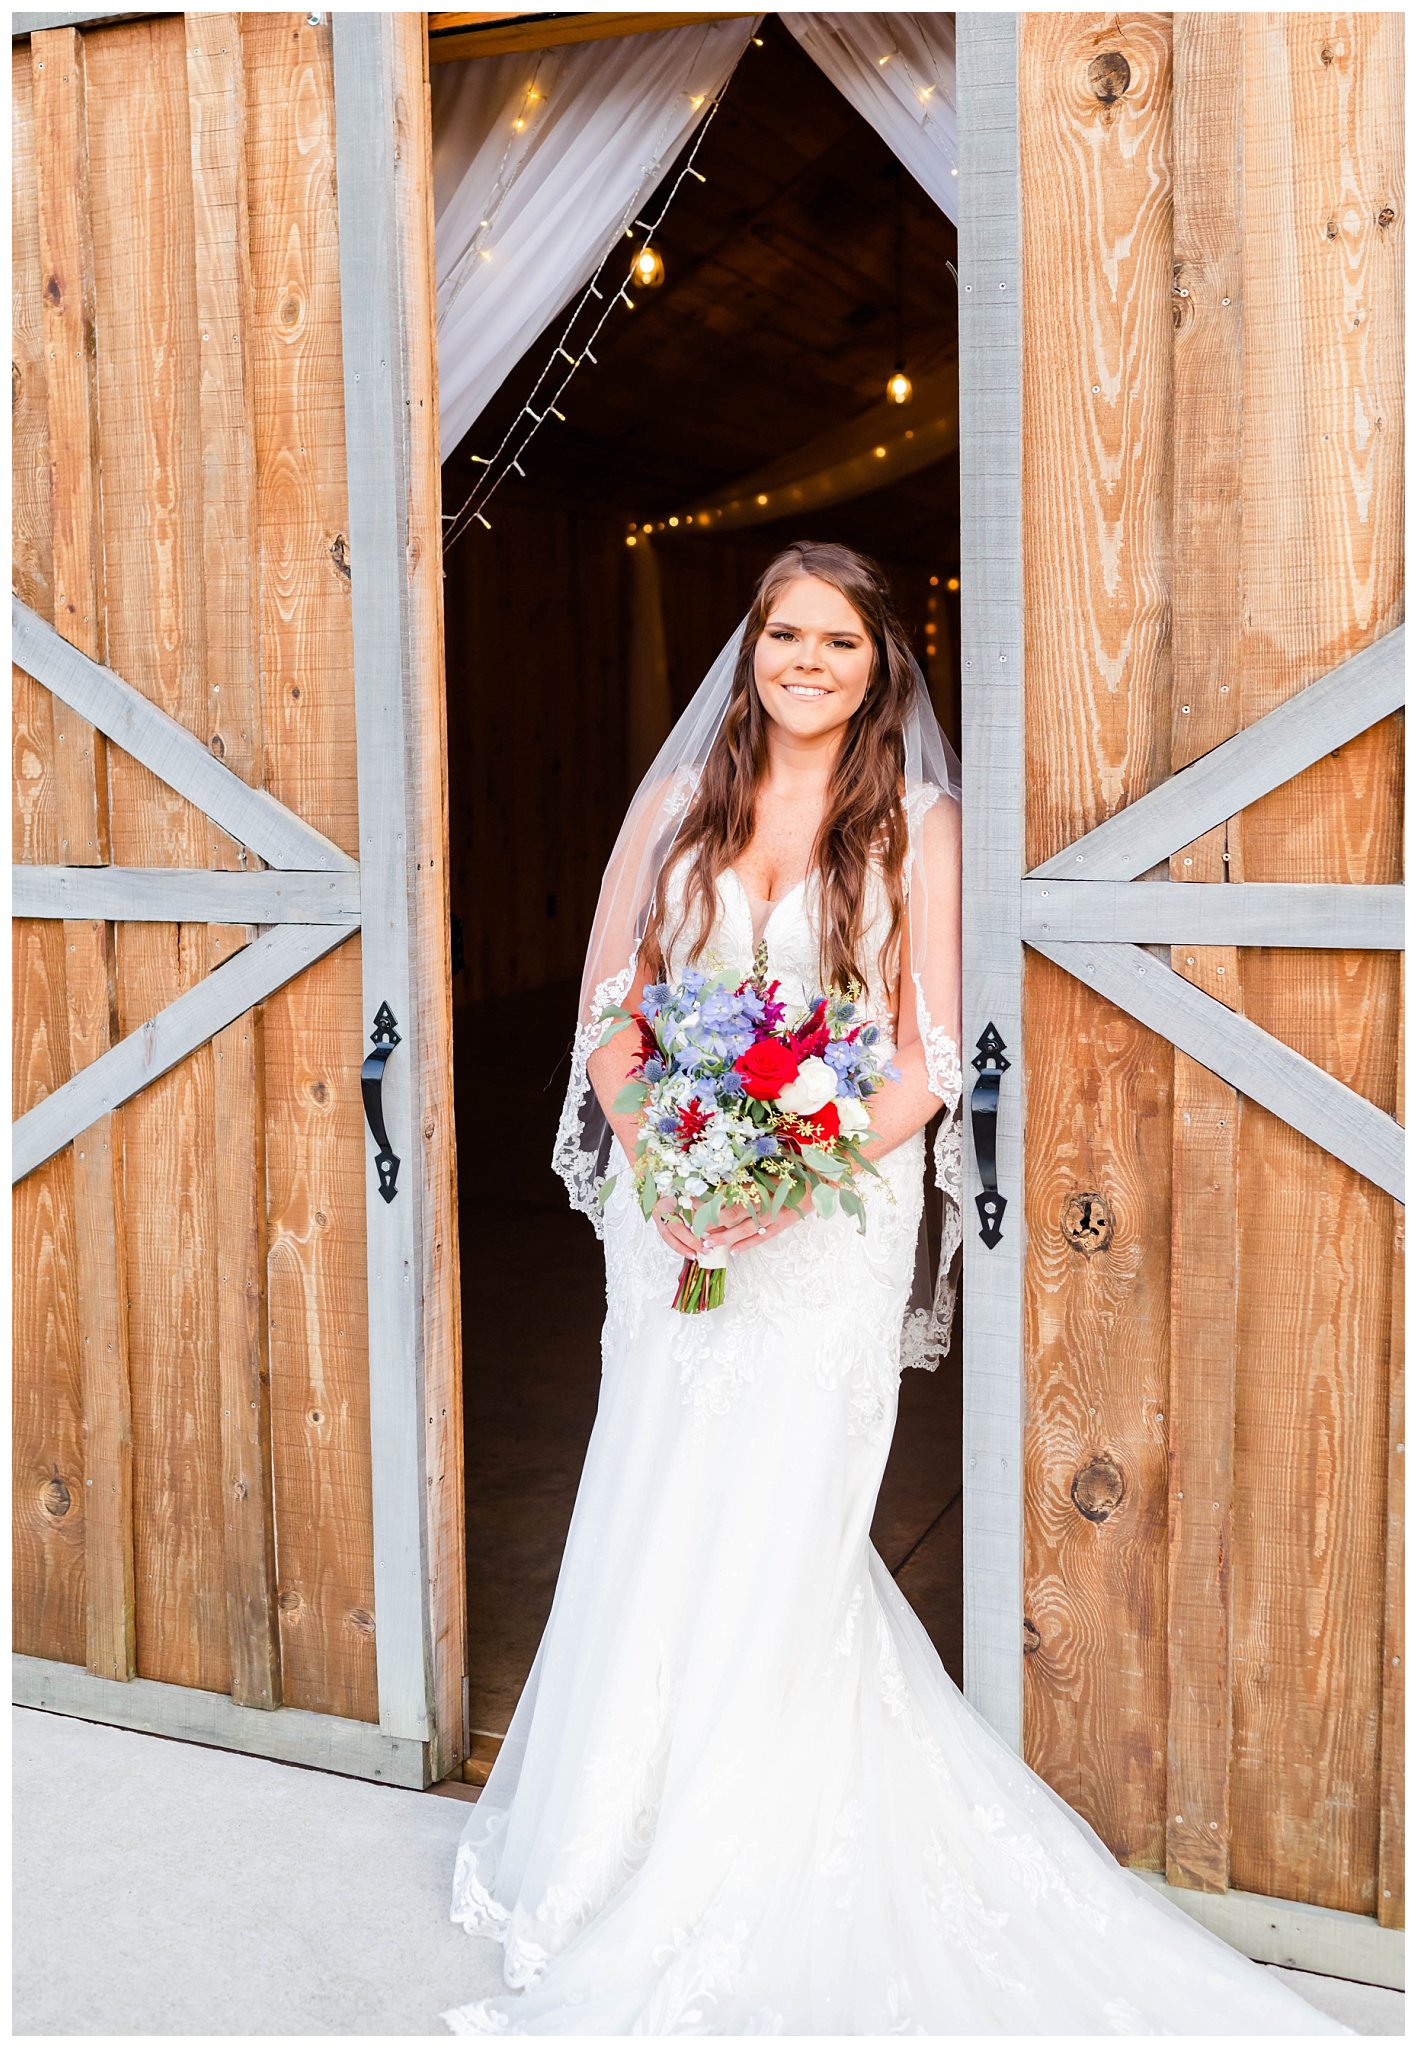 Nicole posing in front of barn for her rustic bridal portraits